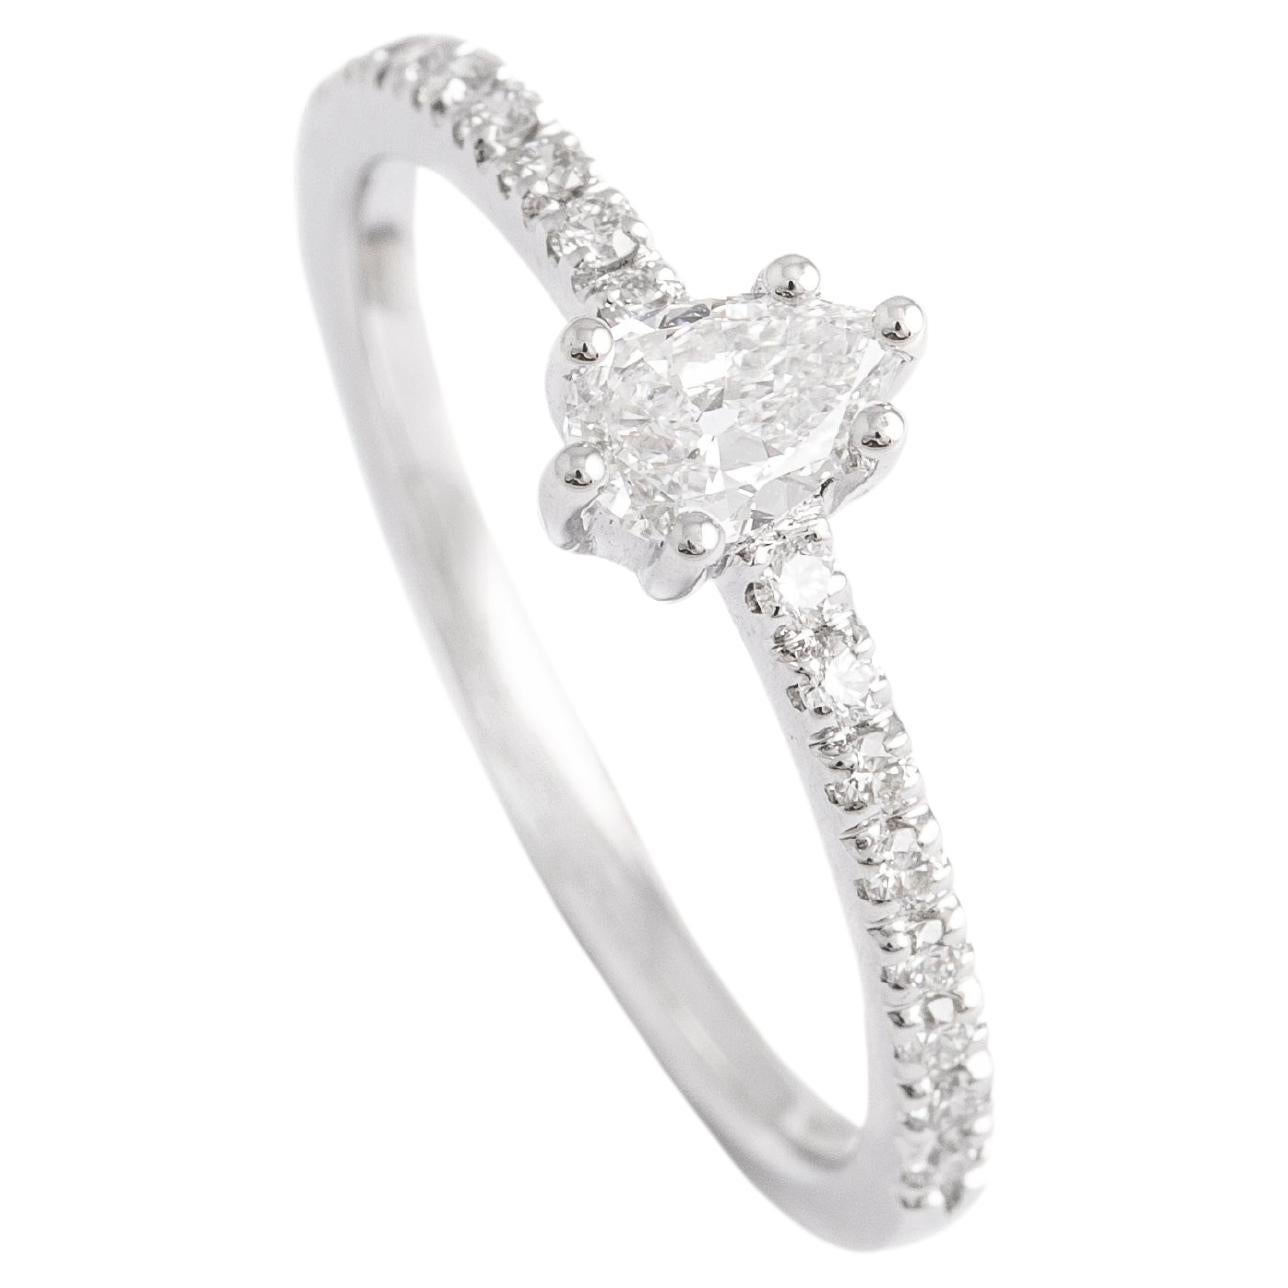 0.295 Carat Diamond Solitaire Ring For Sale